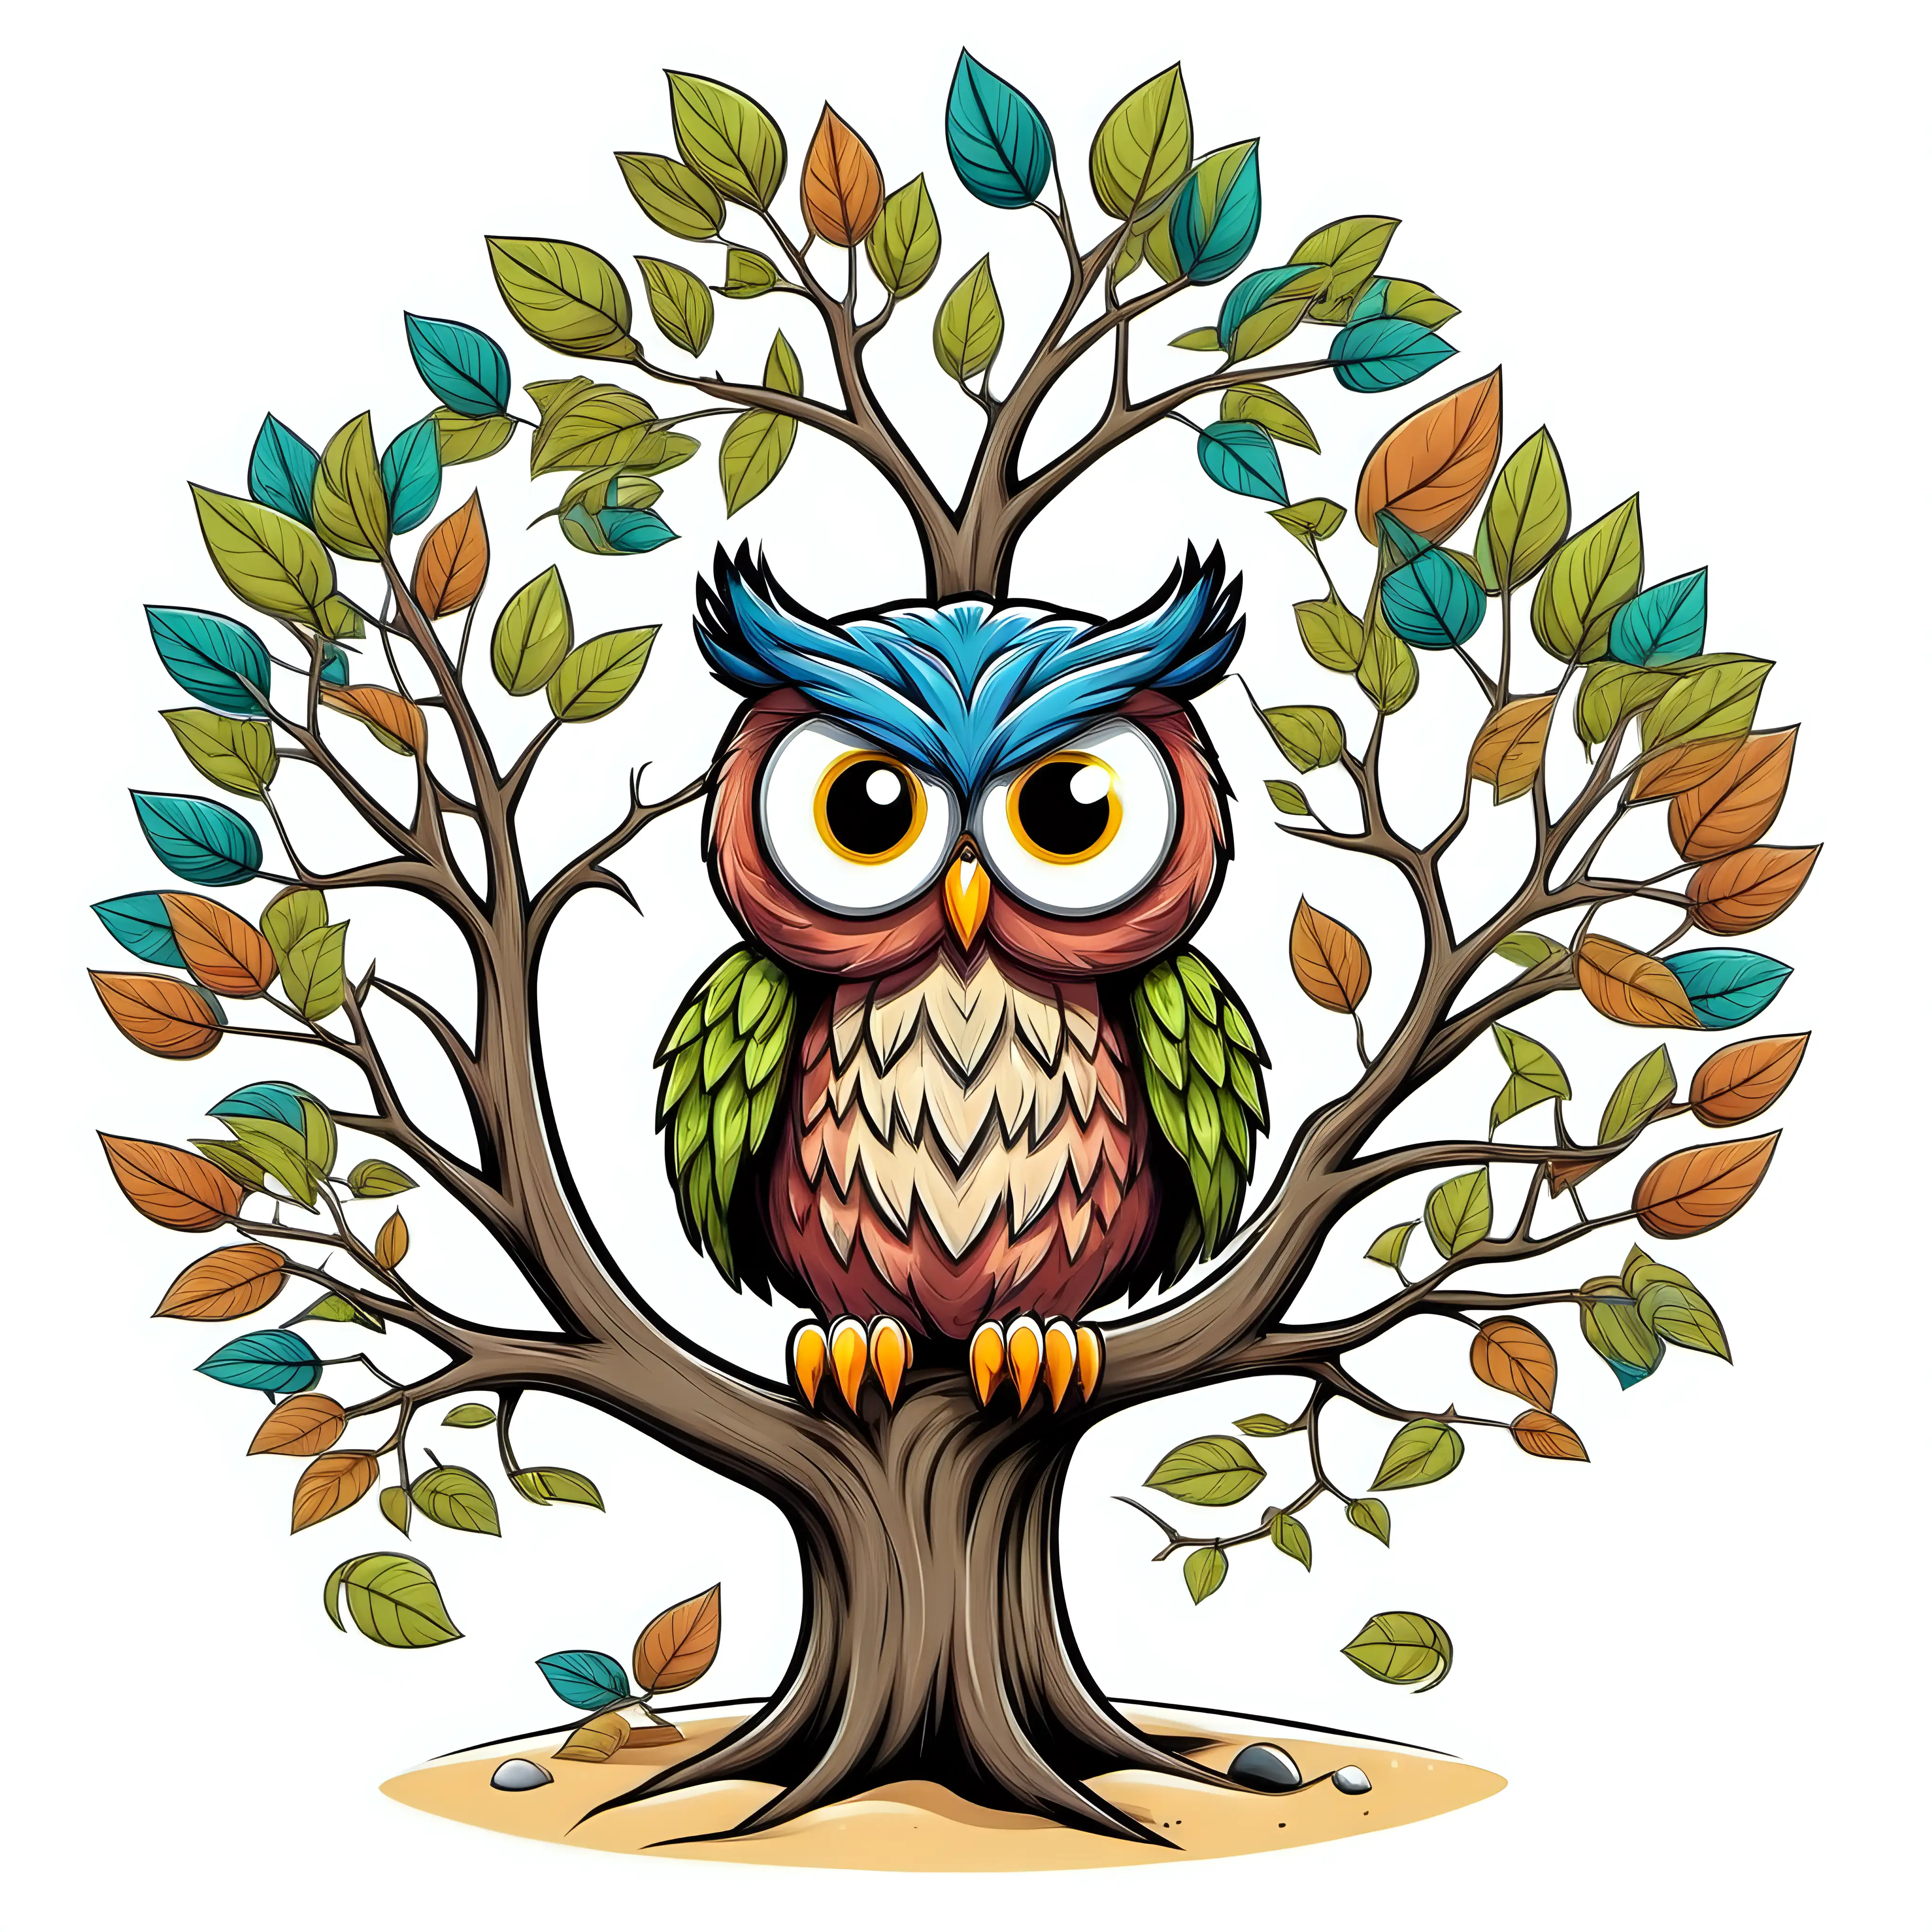 Cartoon owl in a tree in the beach, leaves, 7 colors in image, design for a t-shirt